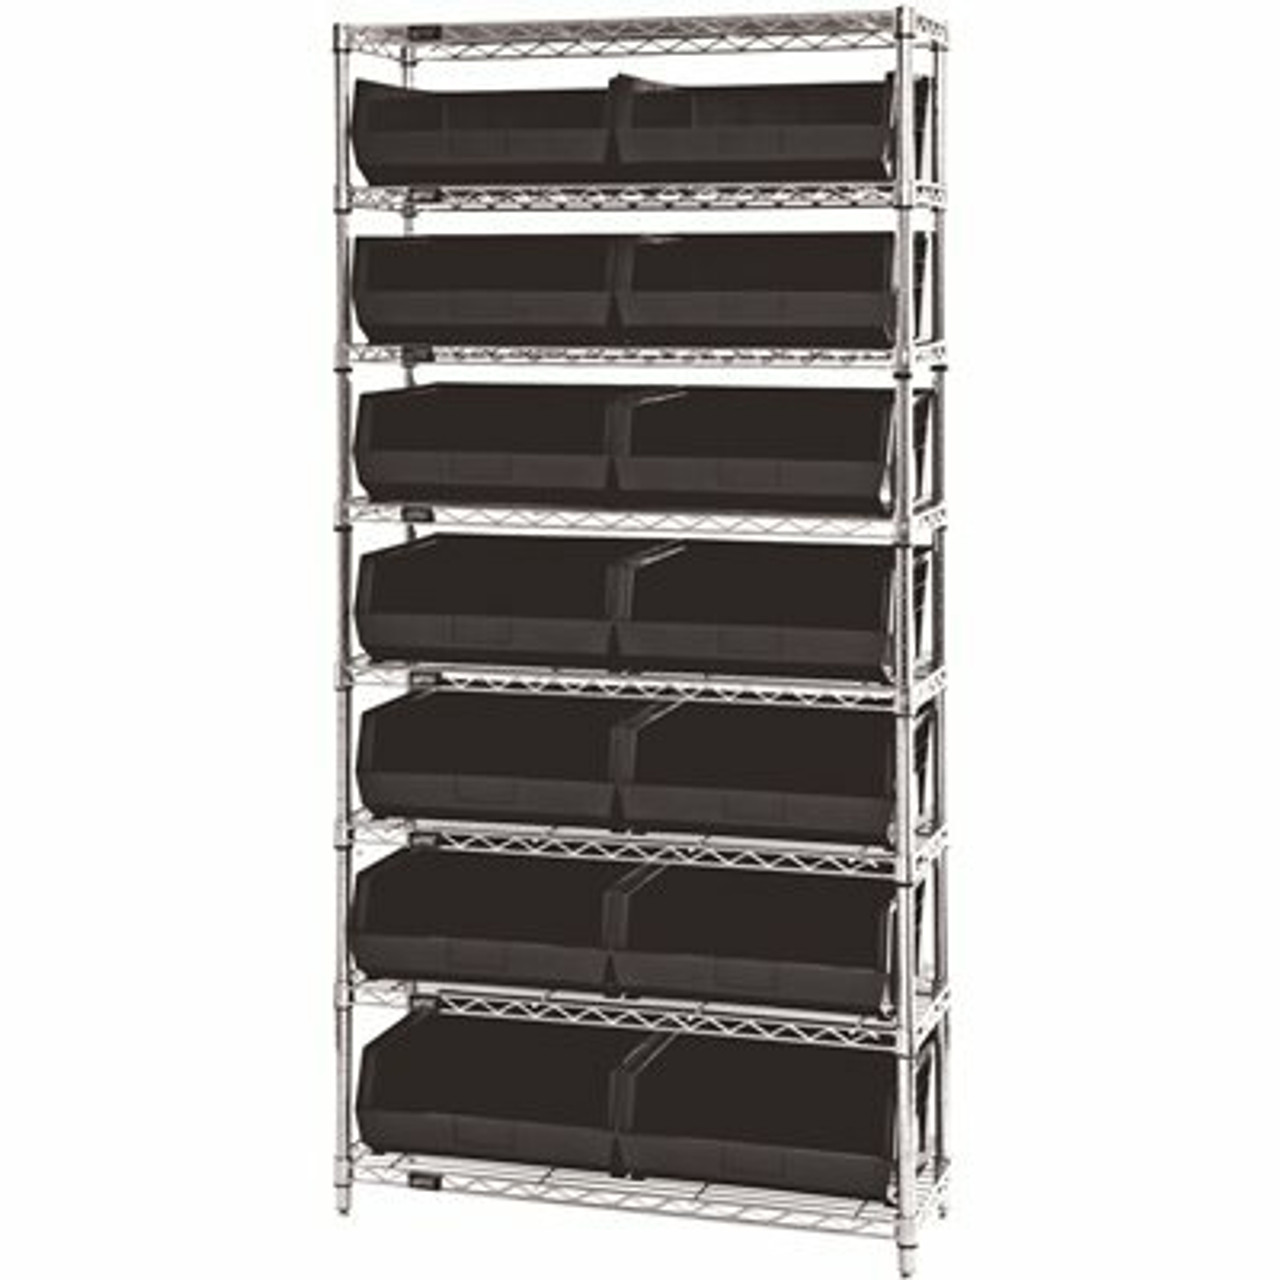 Quantum Storage Systems Giant Open Hopper 36 In. X 14 In. X 74 In. Wire Chrome Heavy Duty 8-Tier Industrial Shelving Unit - 308241555